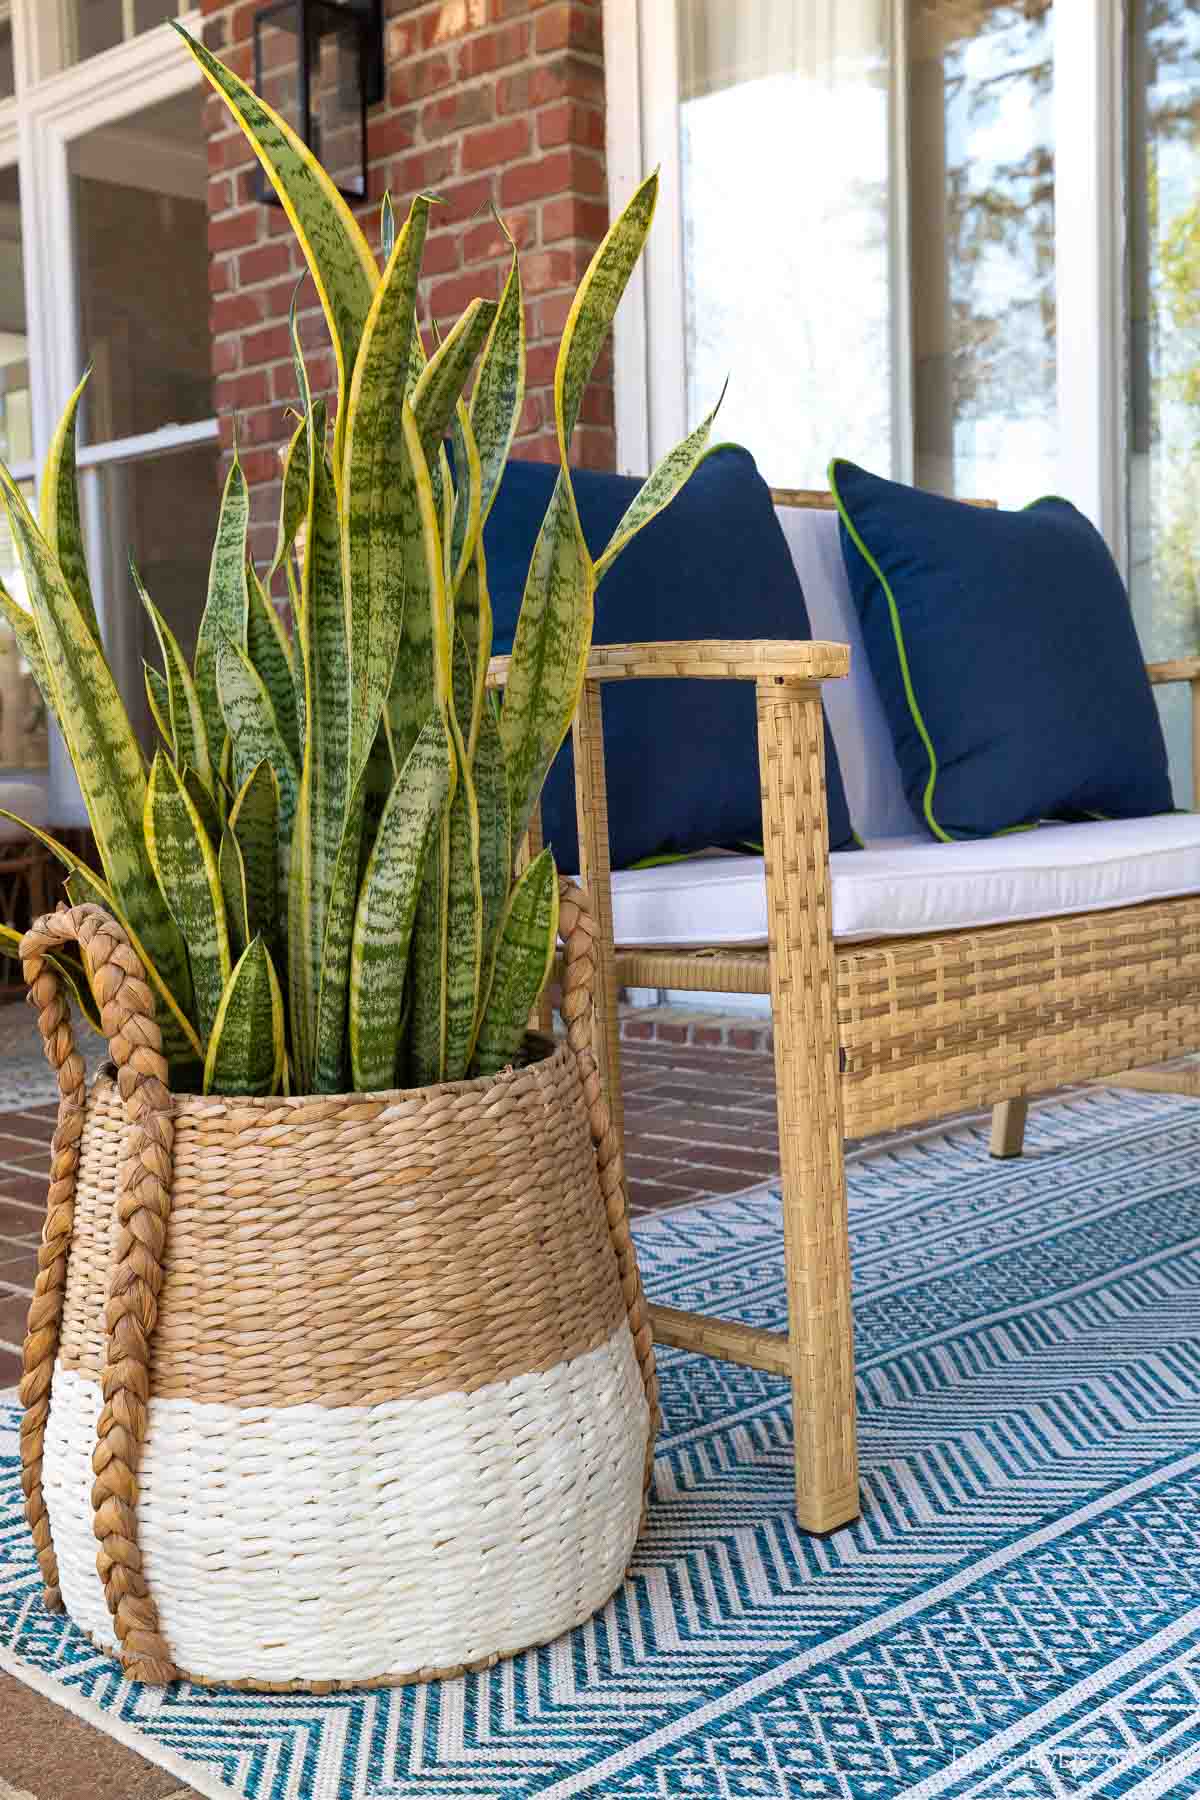 Basket used as covered porch planter